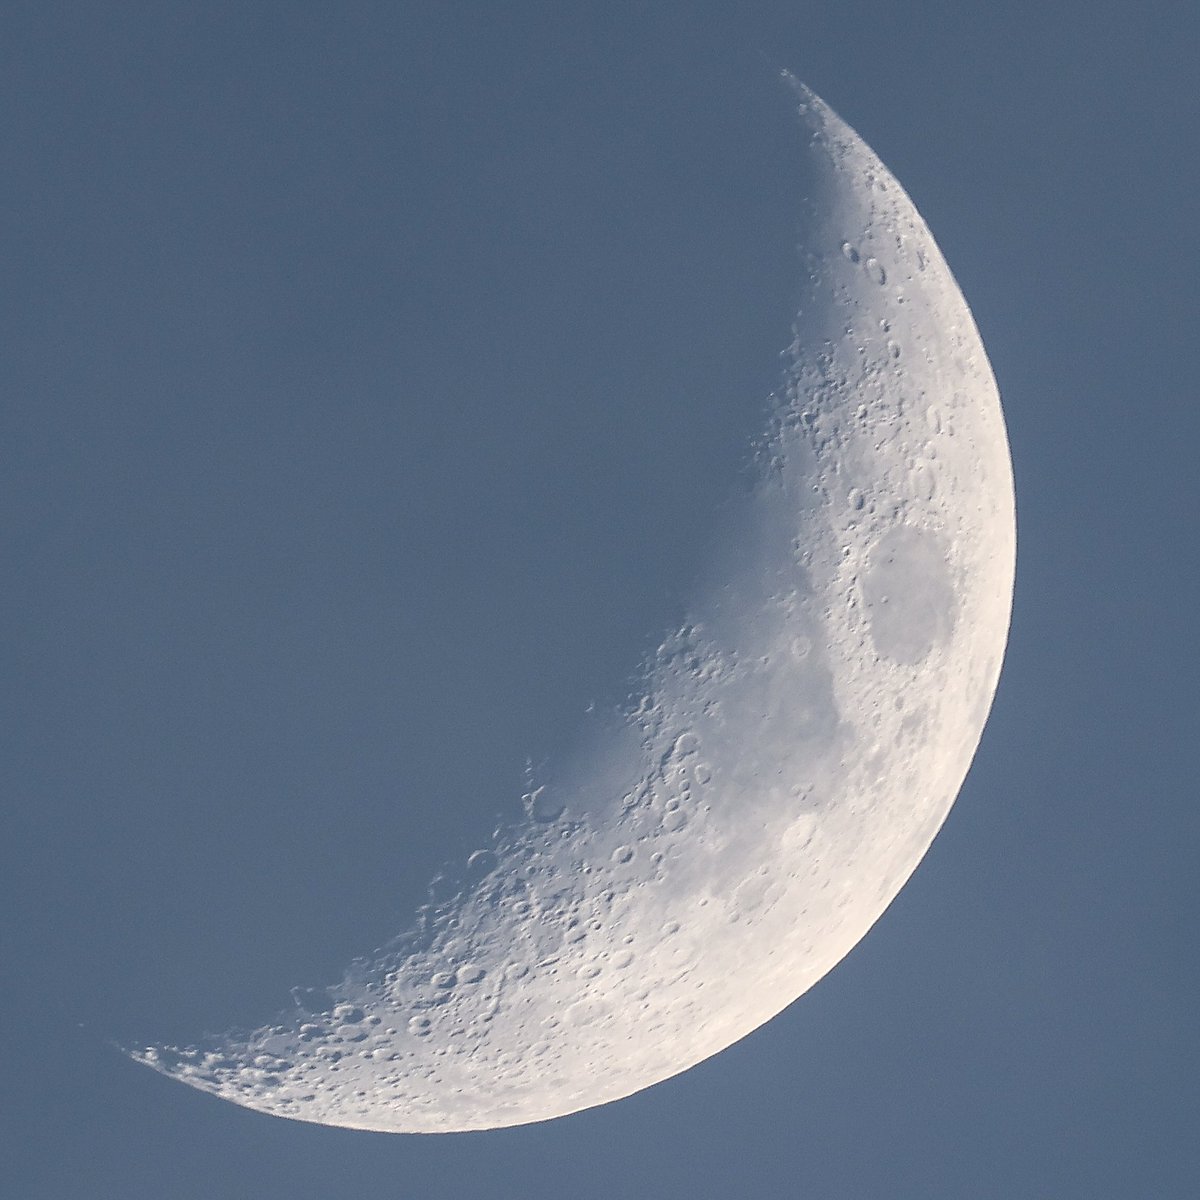 Saturday's moon before and after sunset #MoonHour